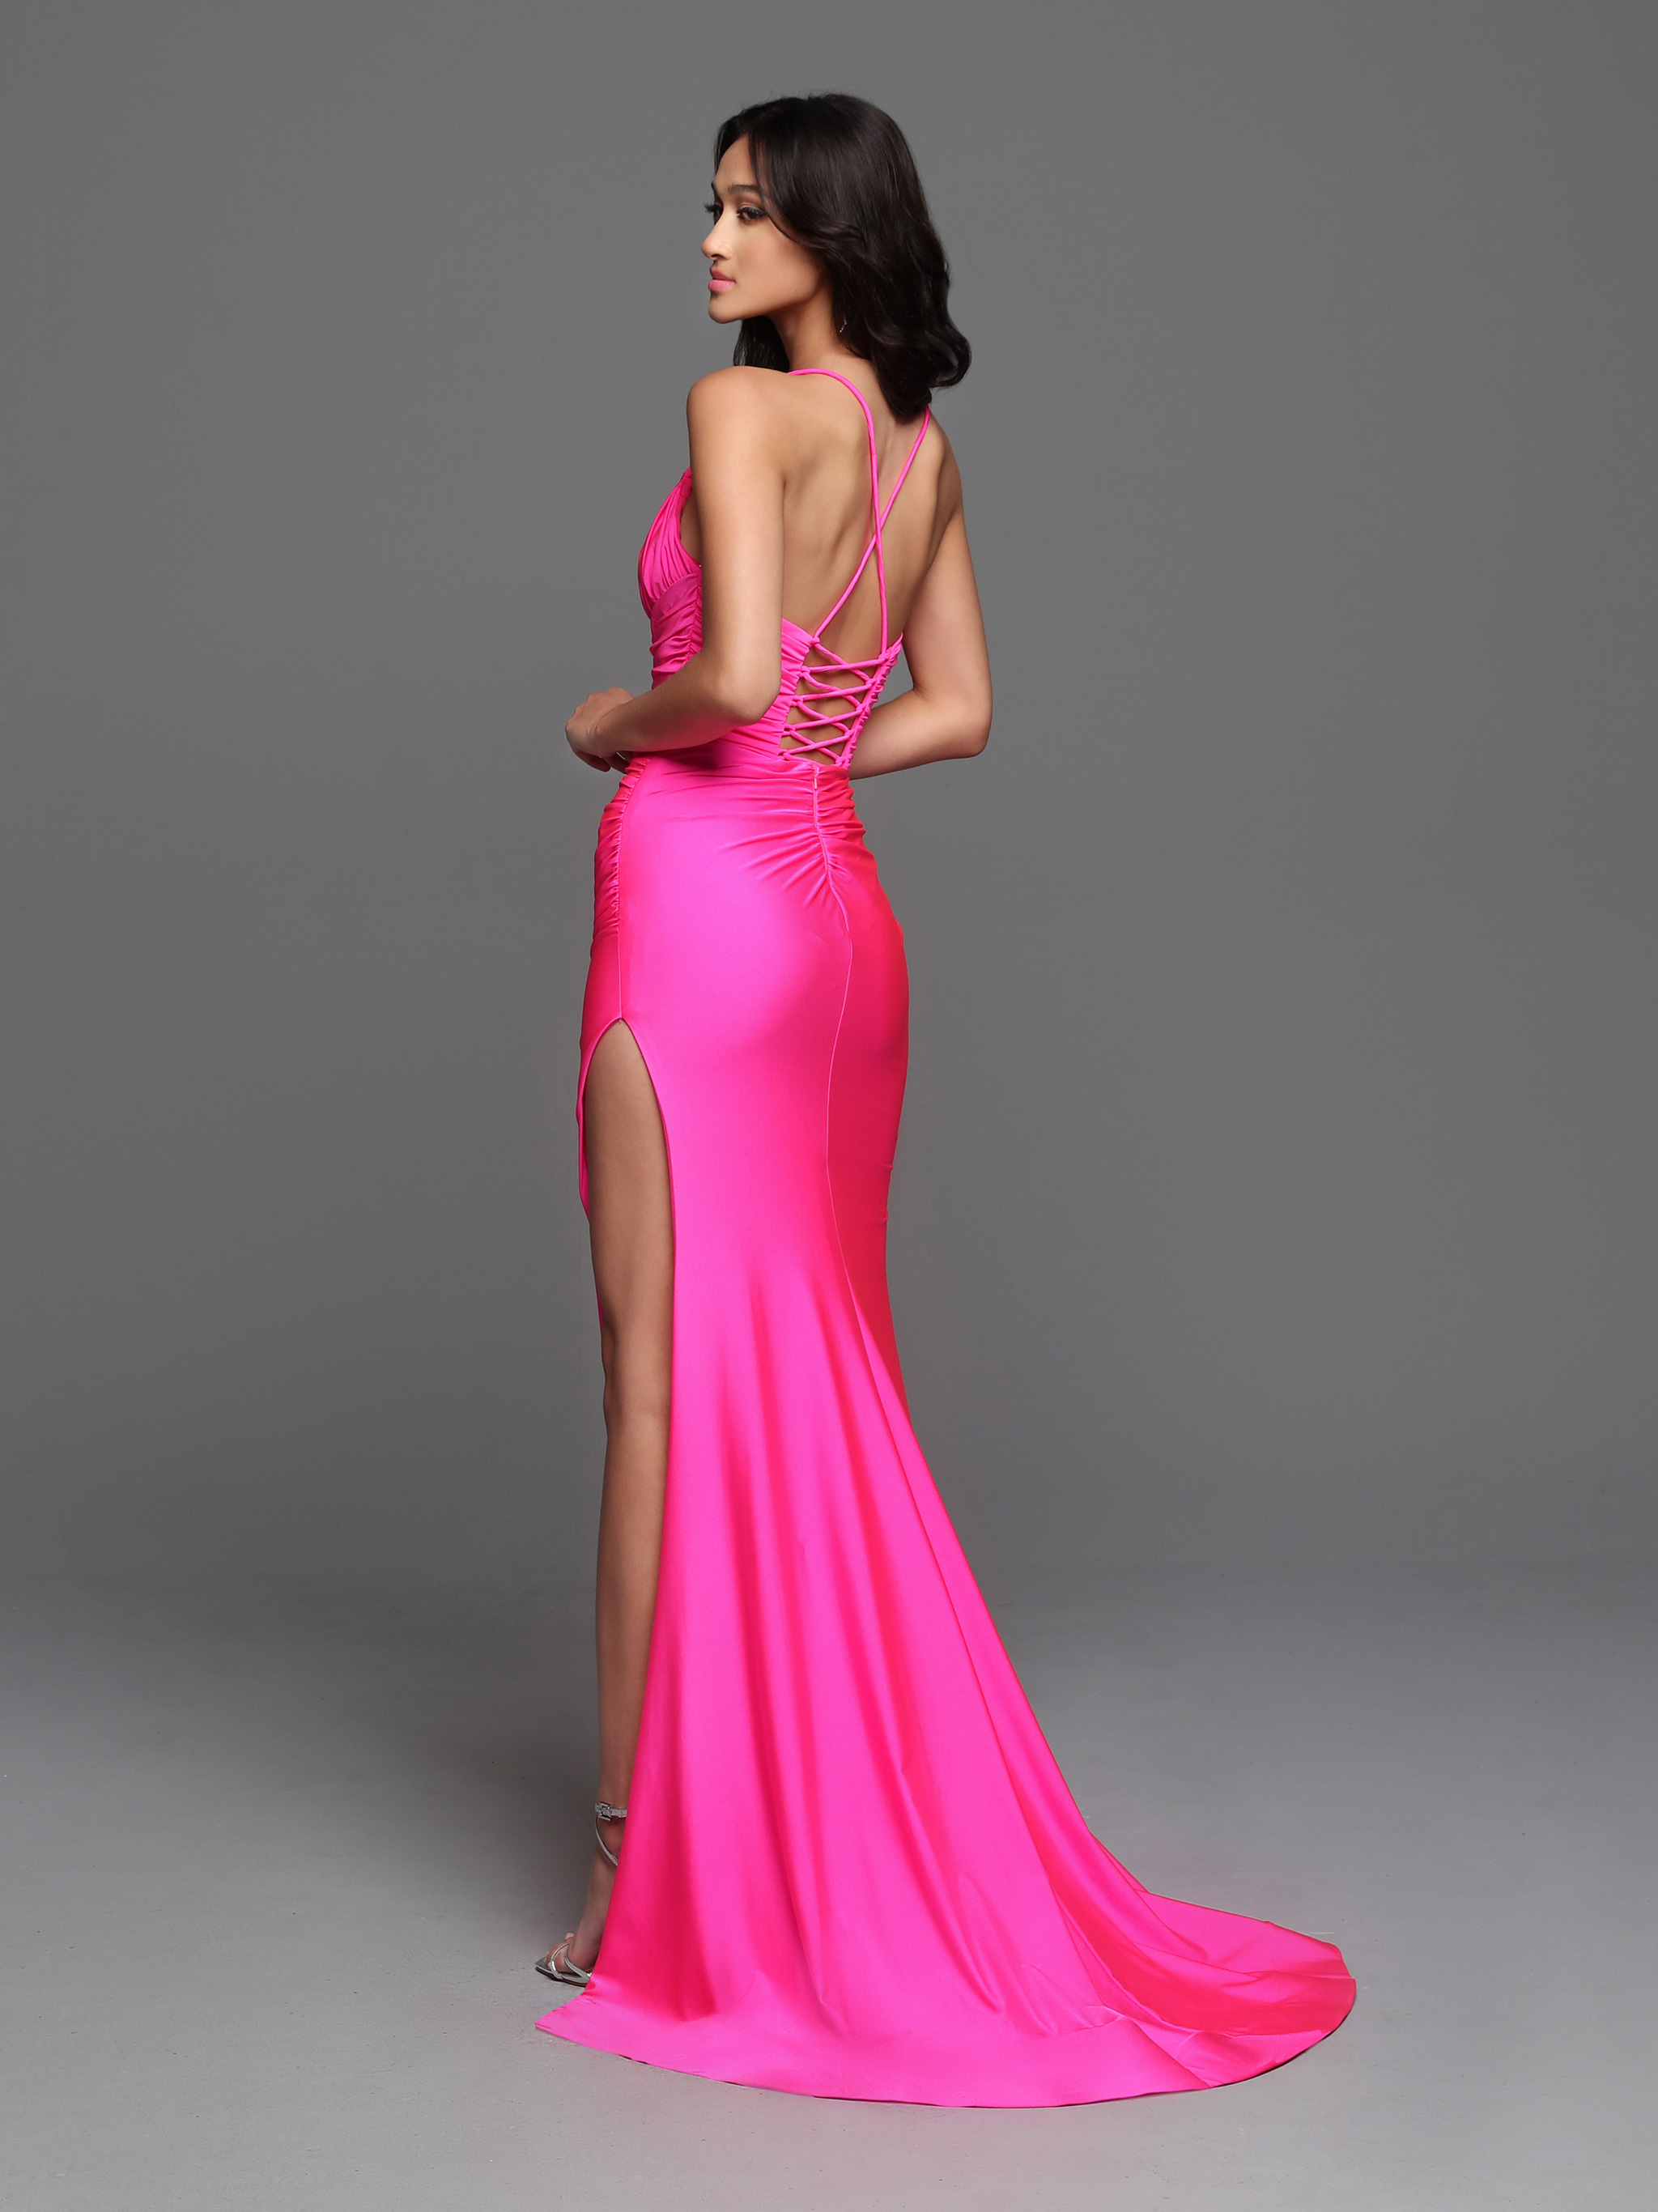 Image showing back view of style #72254